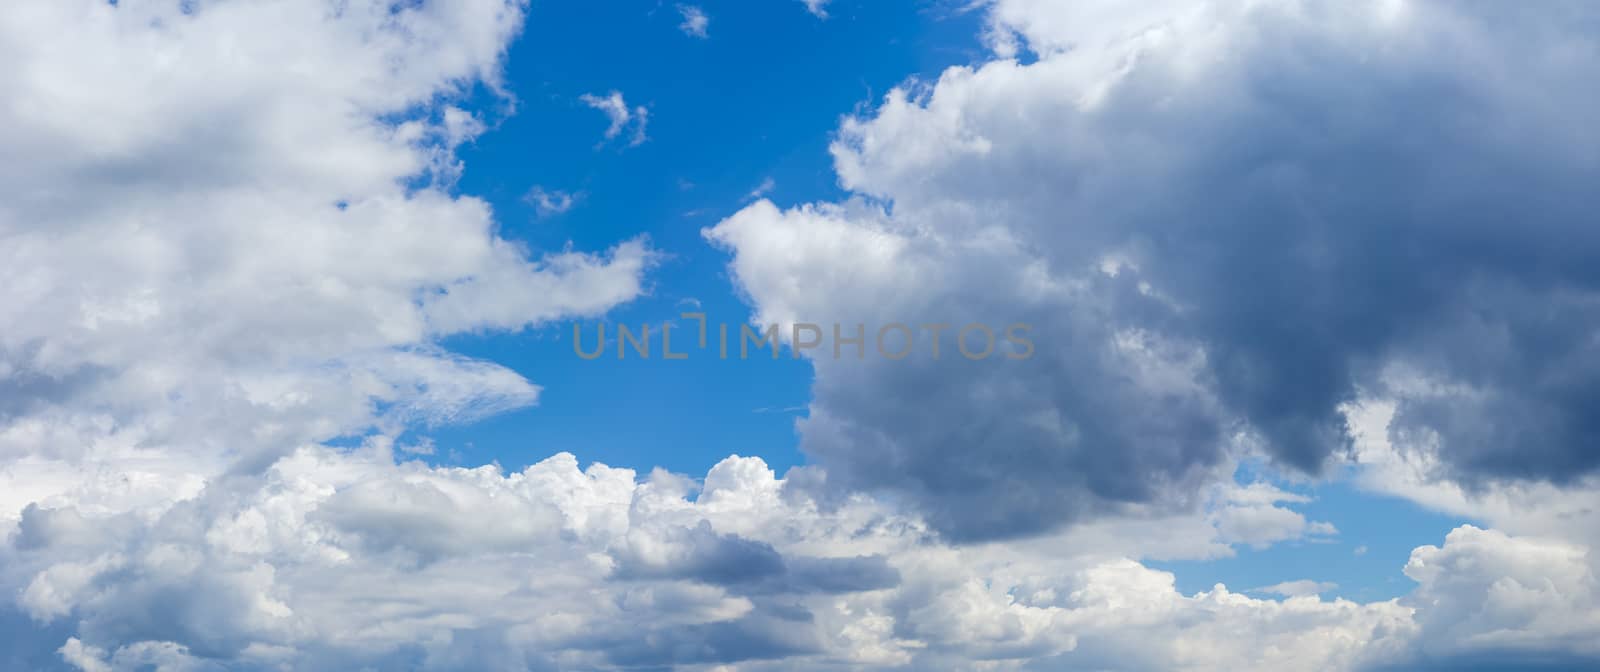 Background of the sky with cumulonimbus clouds  by anmbph